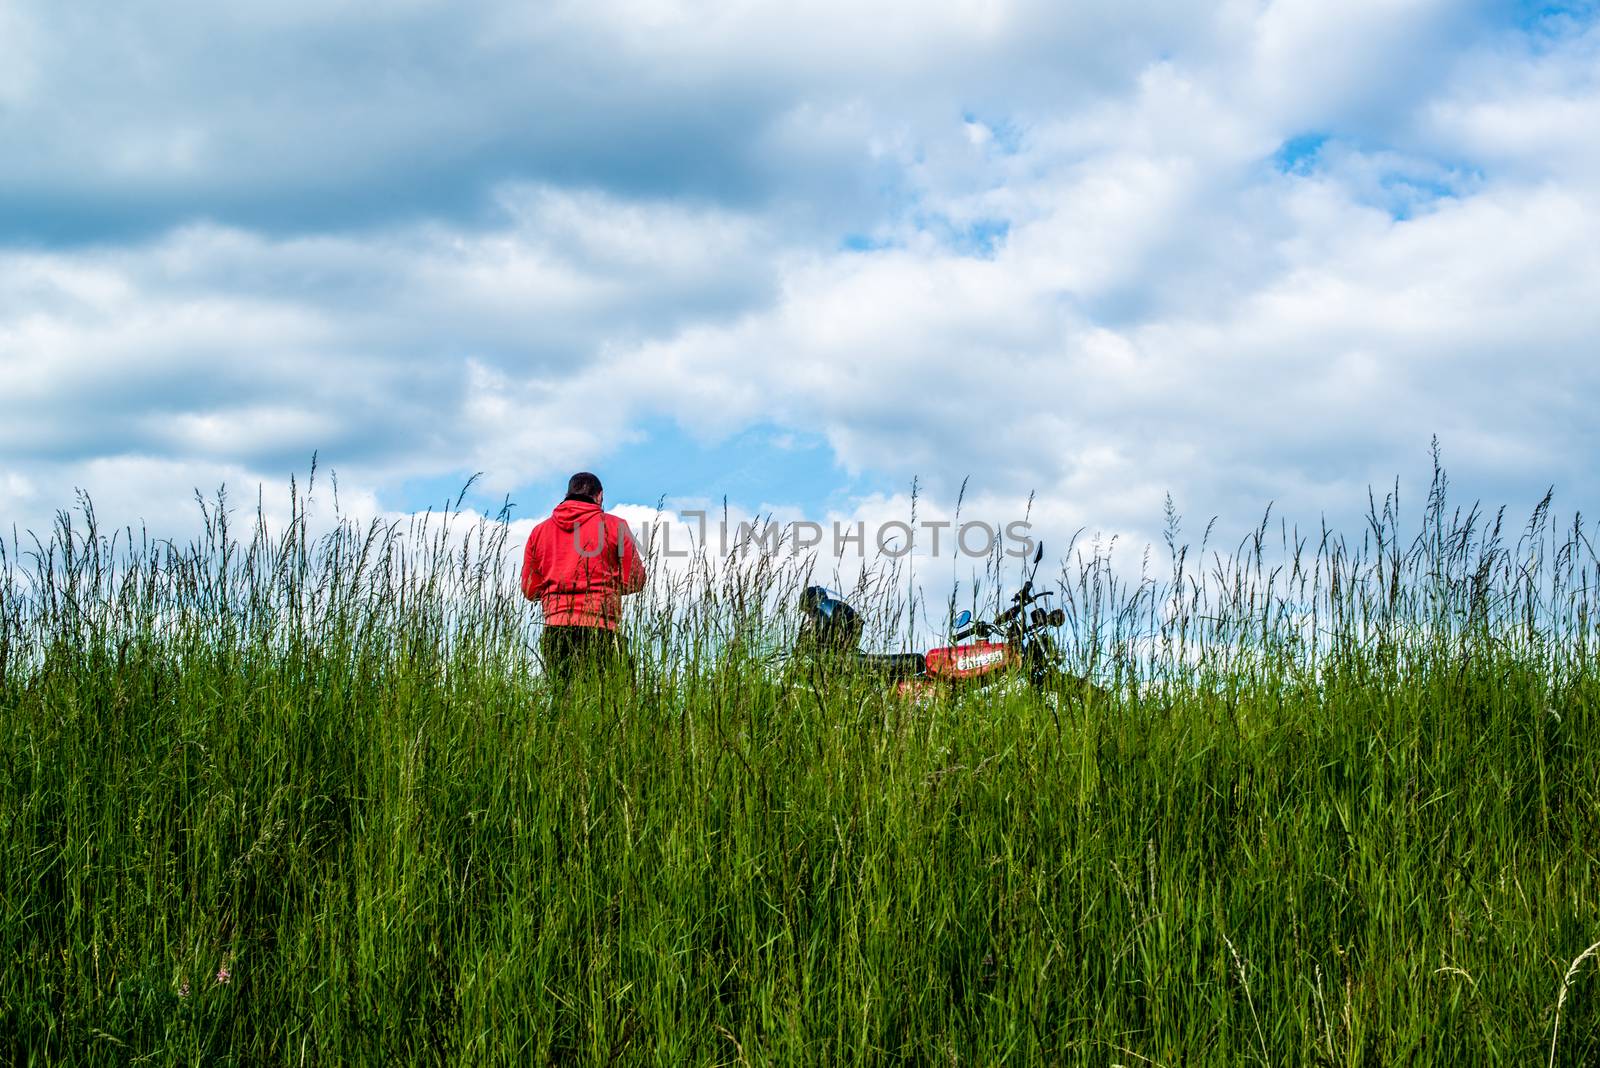 STUTTGART, GERMANY - MAY 17, 2014: A man with his moped is having a break in the fields around the airport in great weather on May, 17, 2014 in Stuttgart, Germany.